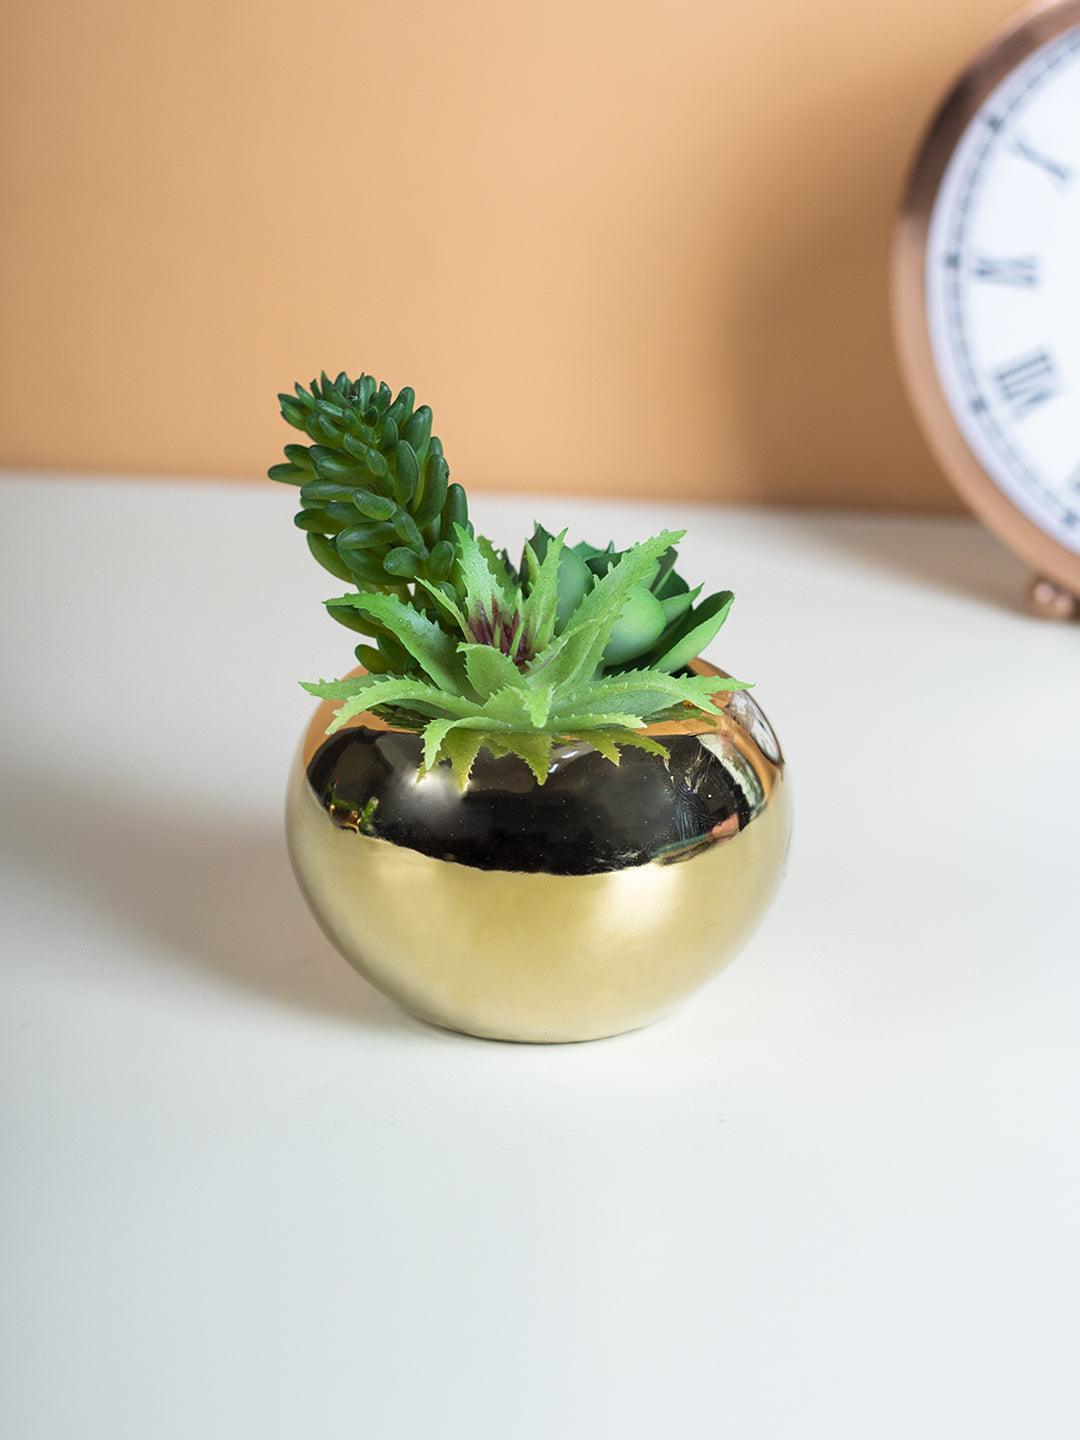 Market 99 Small Flowers Artificial Plant With White Pot - MARKET 99